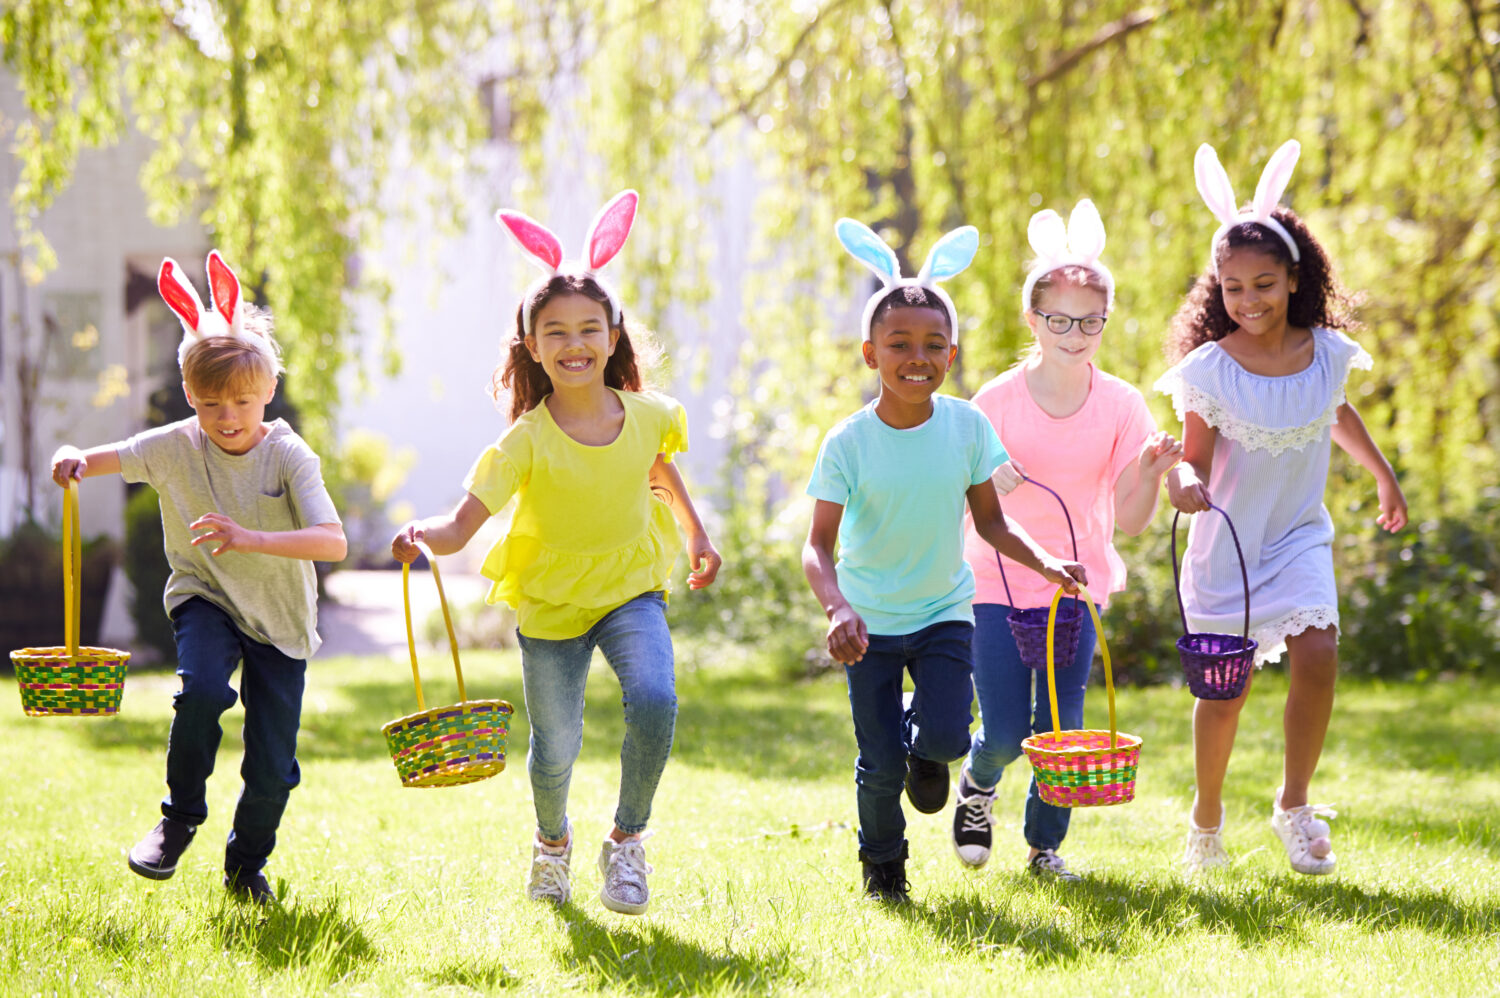 Easter Egg Hunts for kids and adults this Saturday